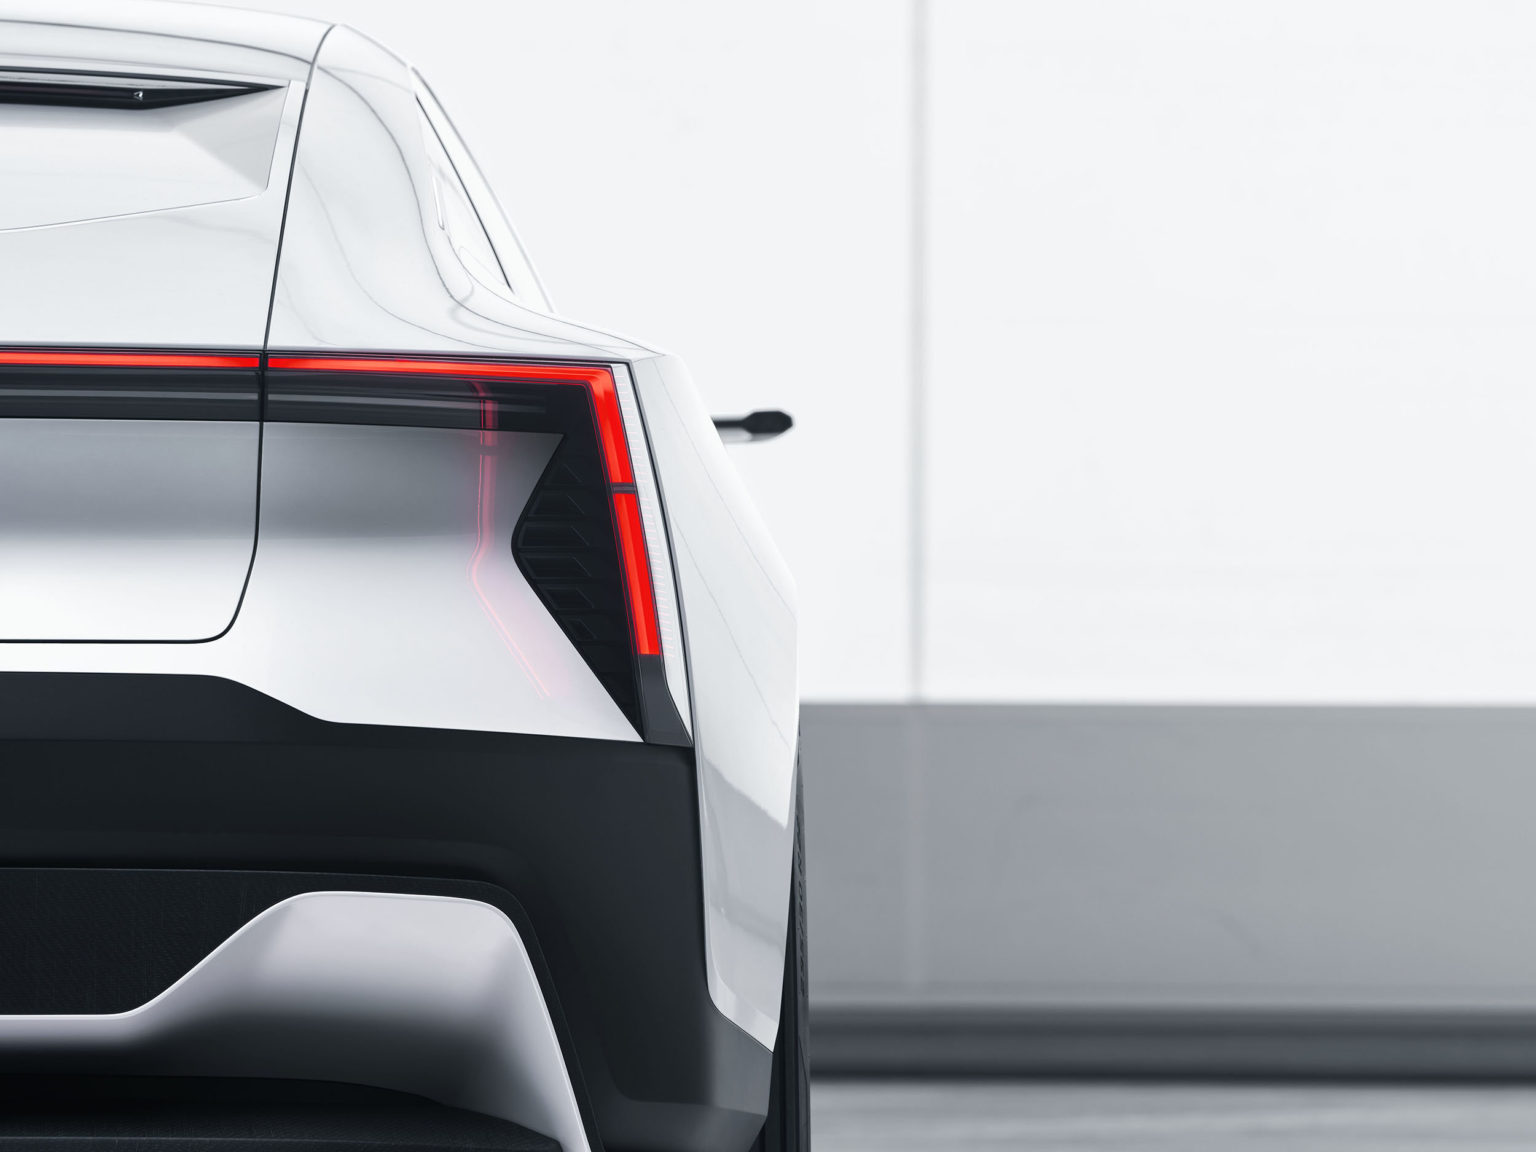 The Polestar Precept is moving forward into production.